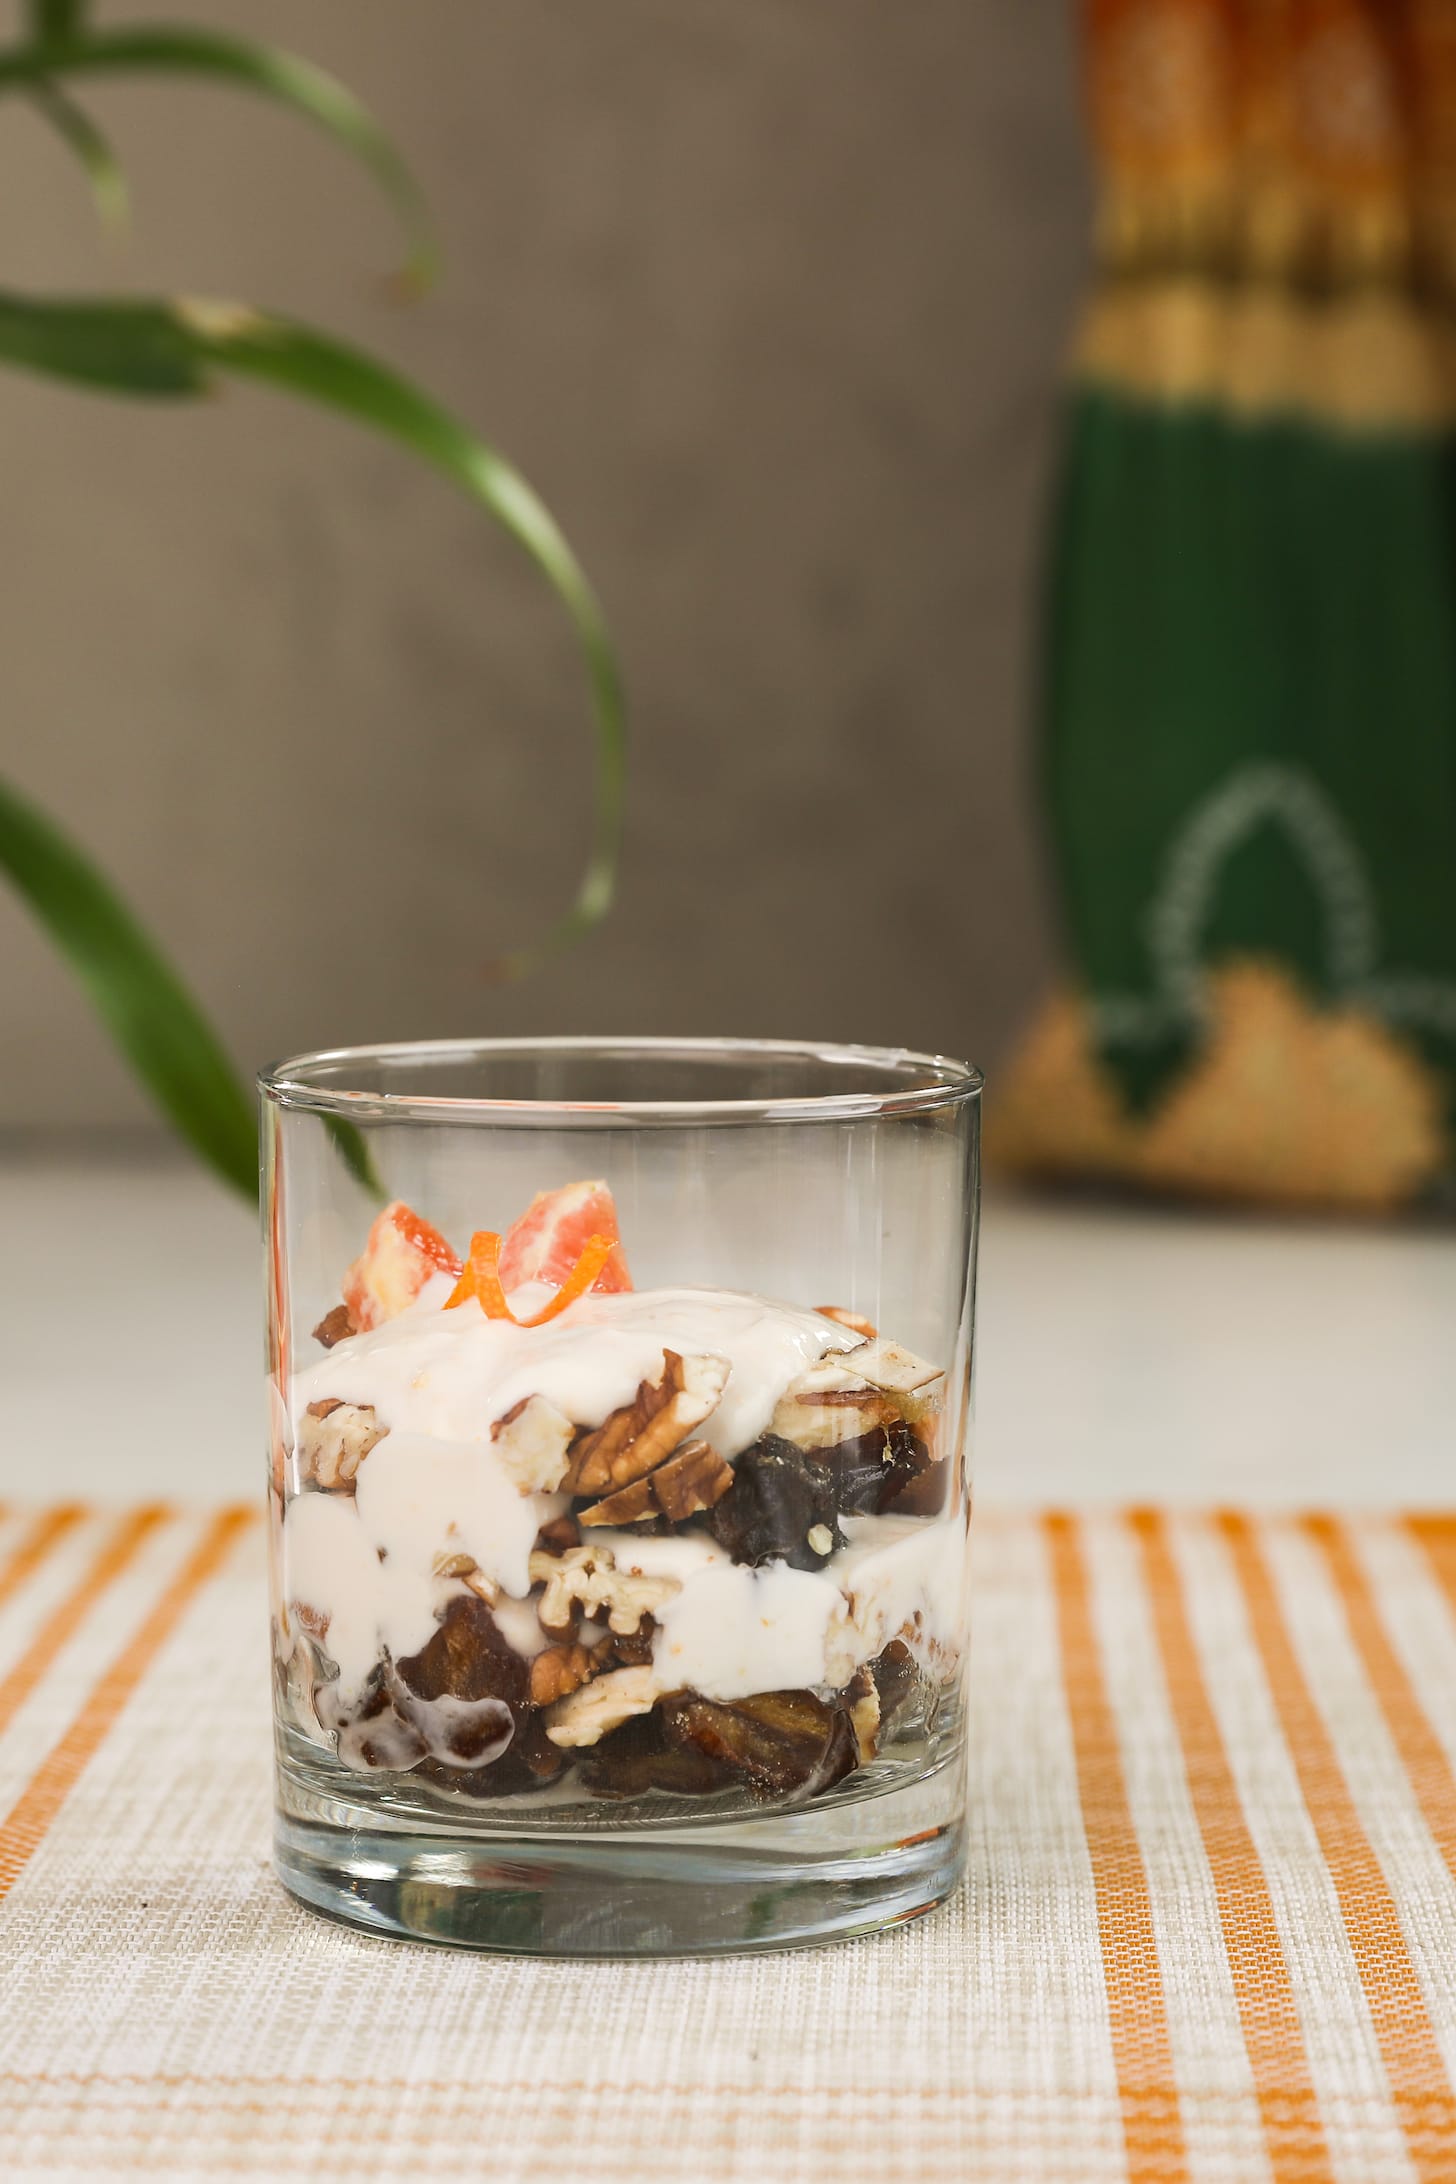 a glass filled with layers of yogurt and nuts with green leaves in the background.